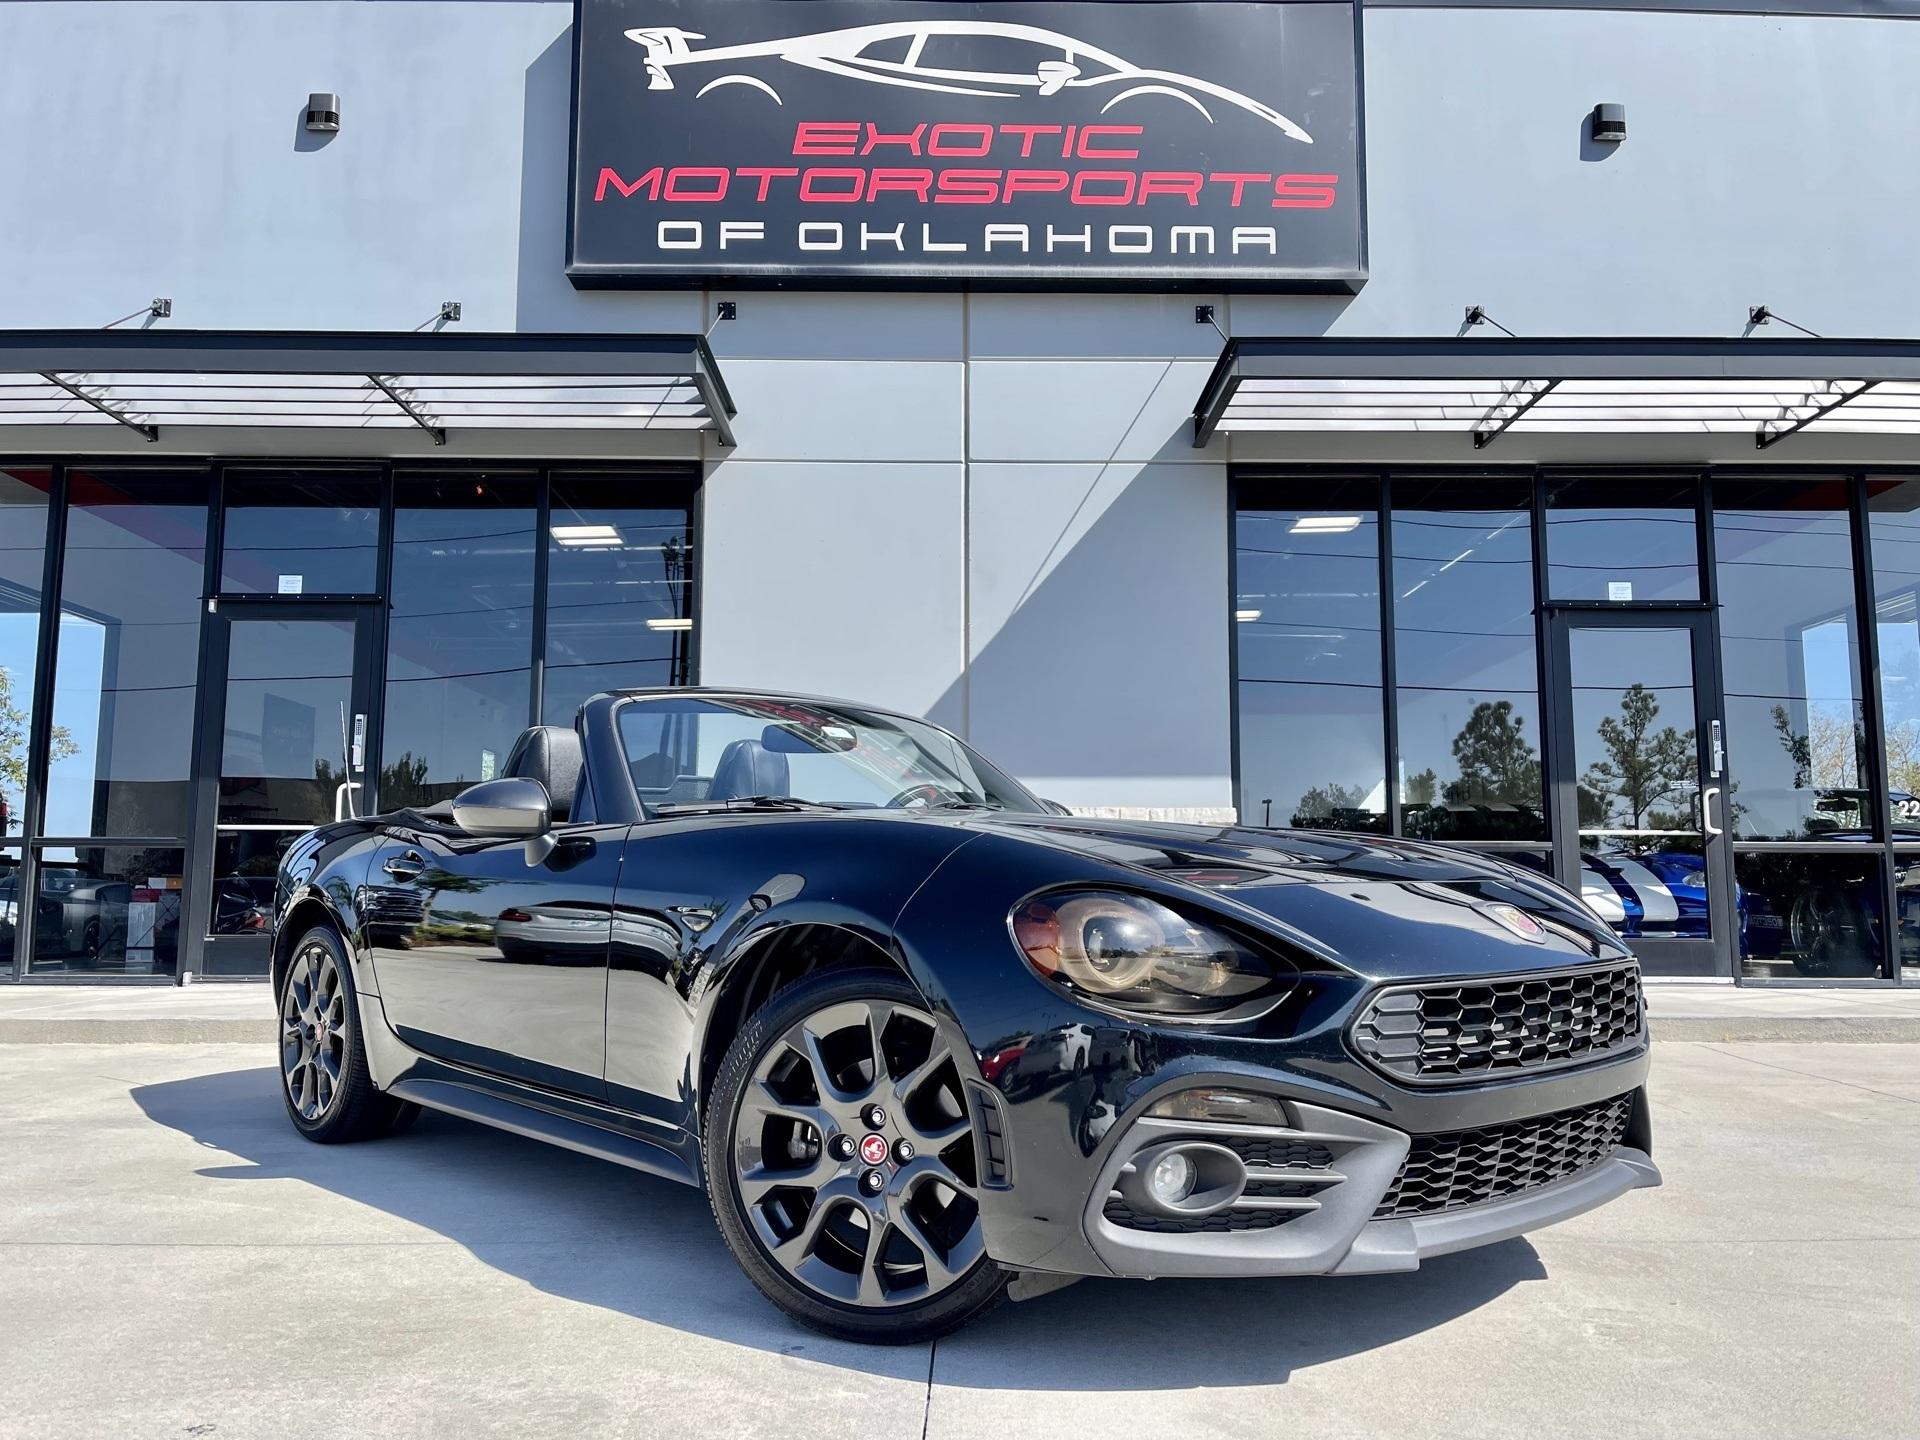 The 2017 Fiat 124 Spider Is a Great Car Made Into a Good One